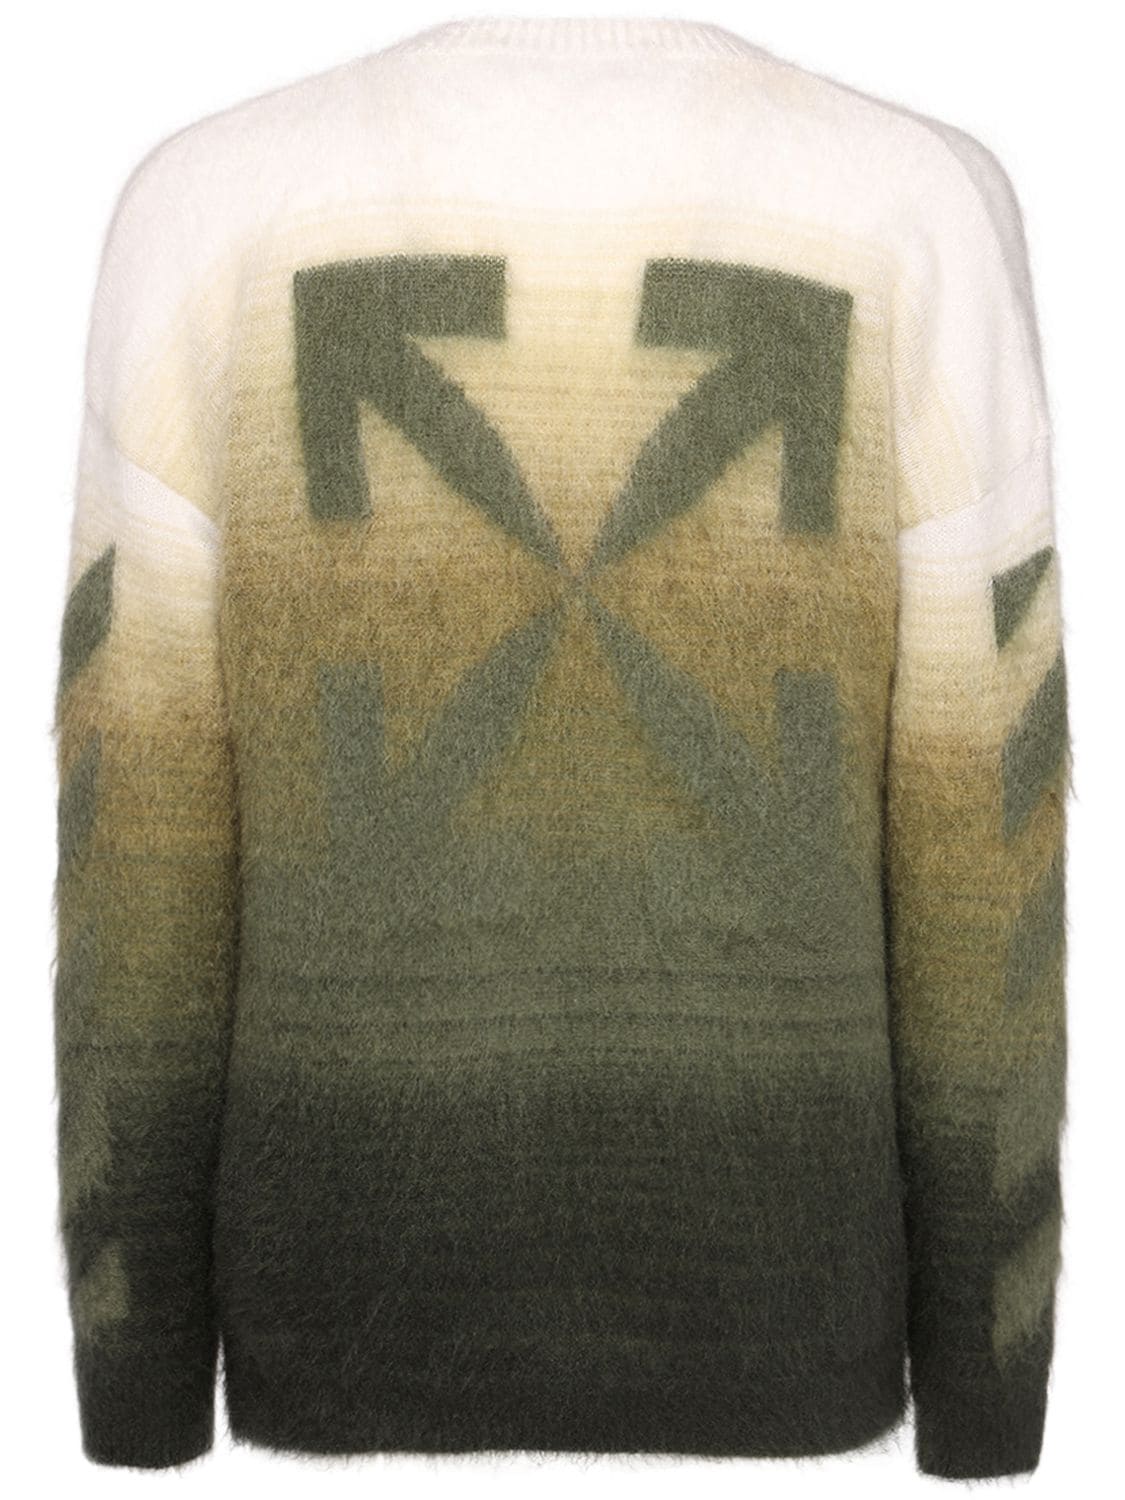 Diag Brushed Mohair Blend Knit Sweater